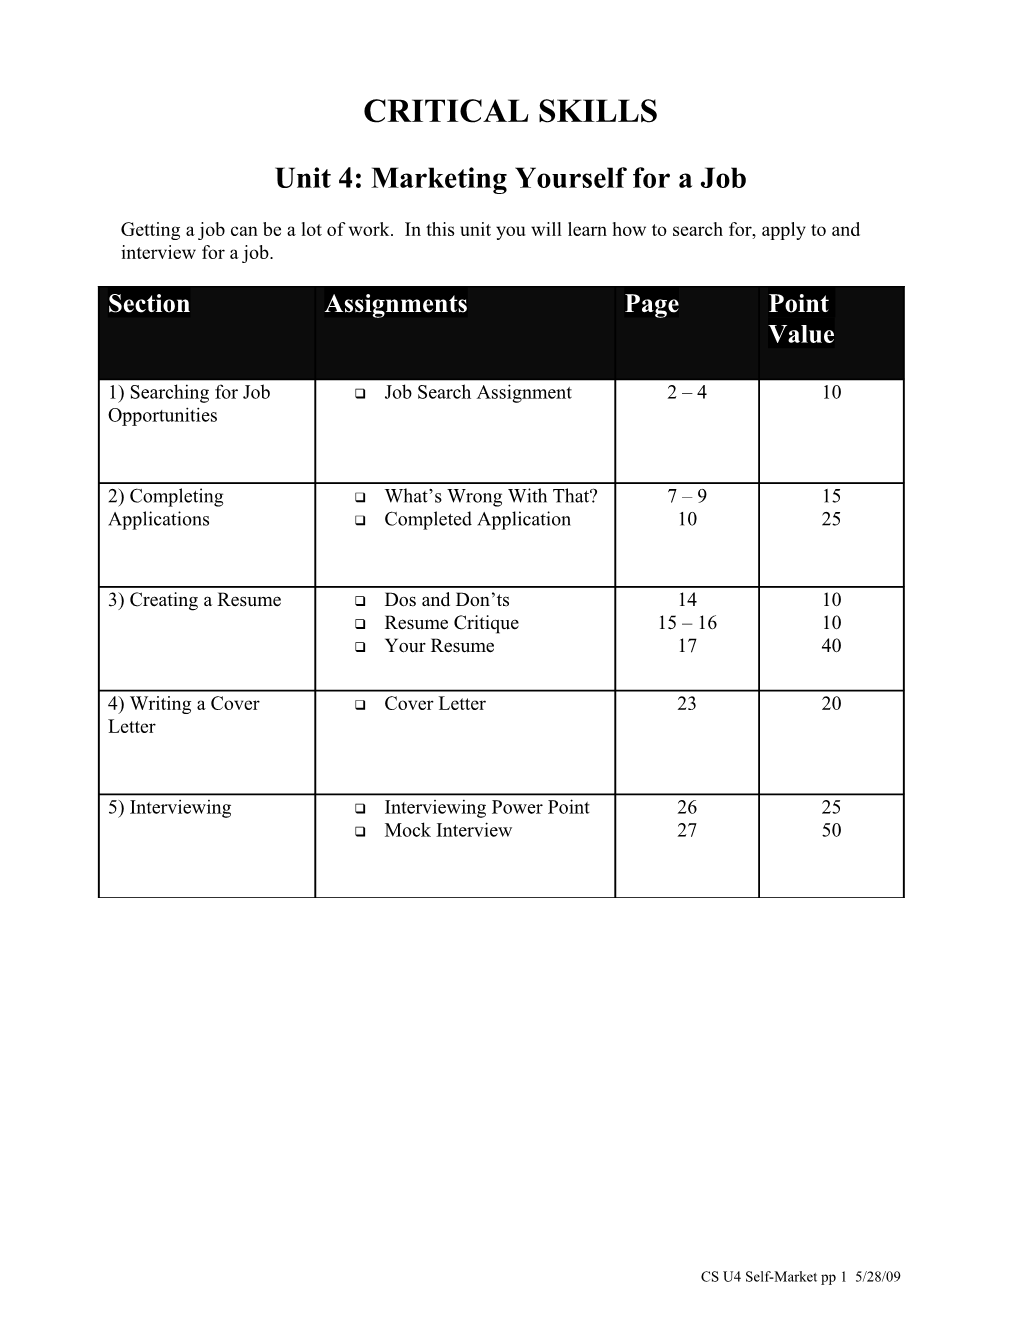 Unit 4: Marketing Yourself for a Job